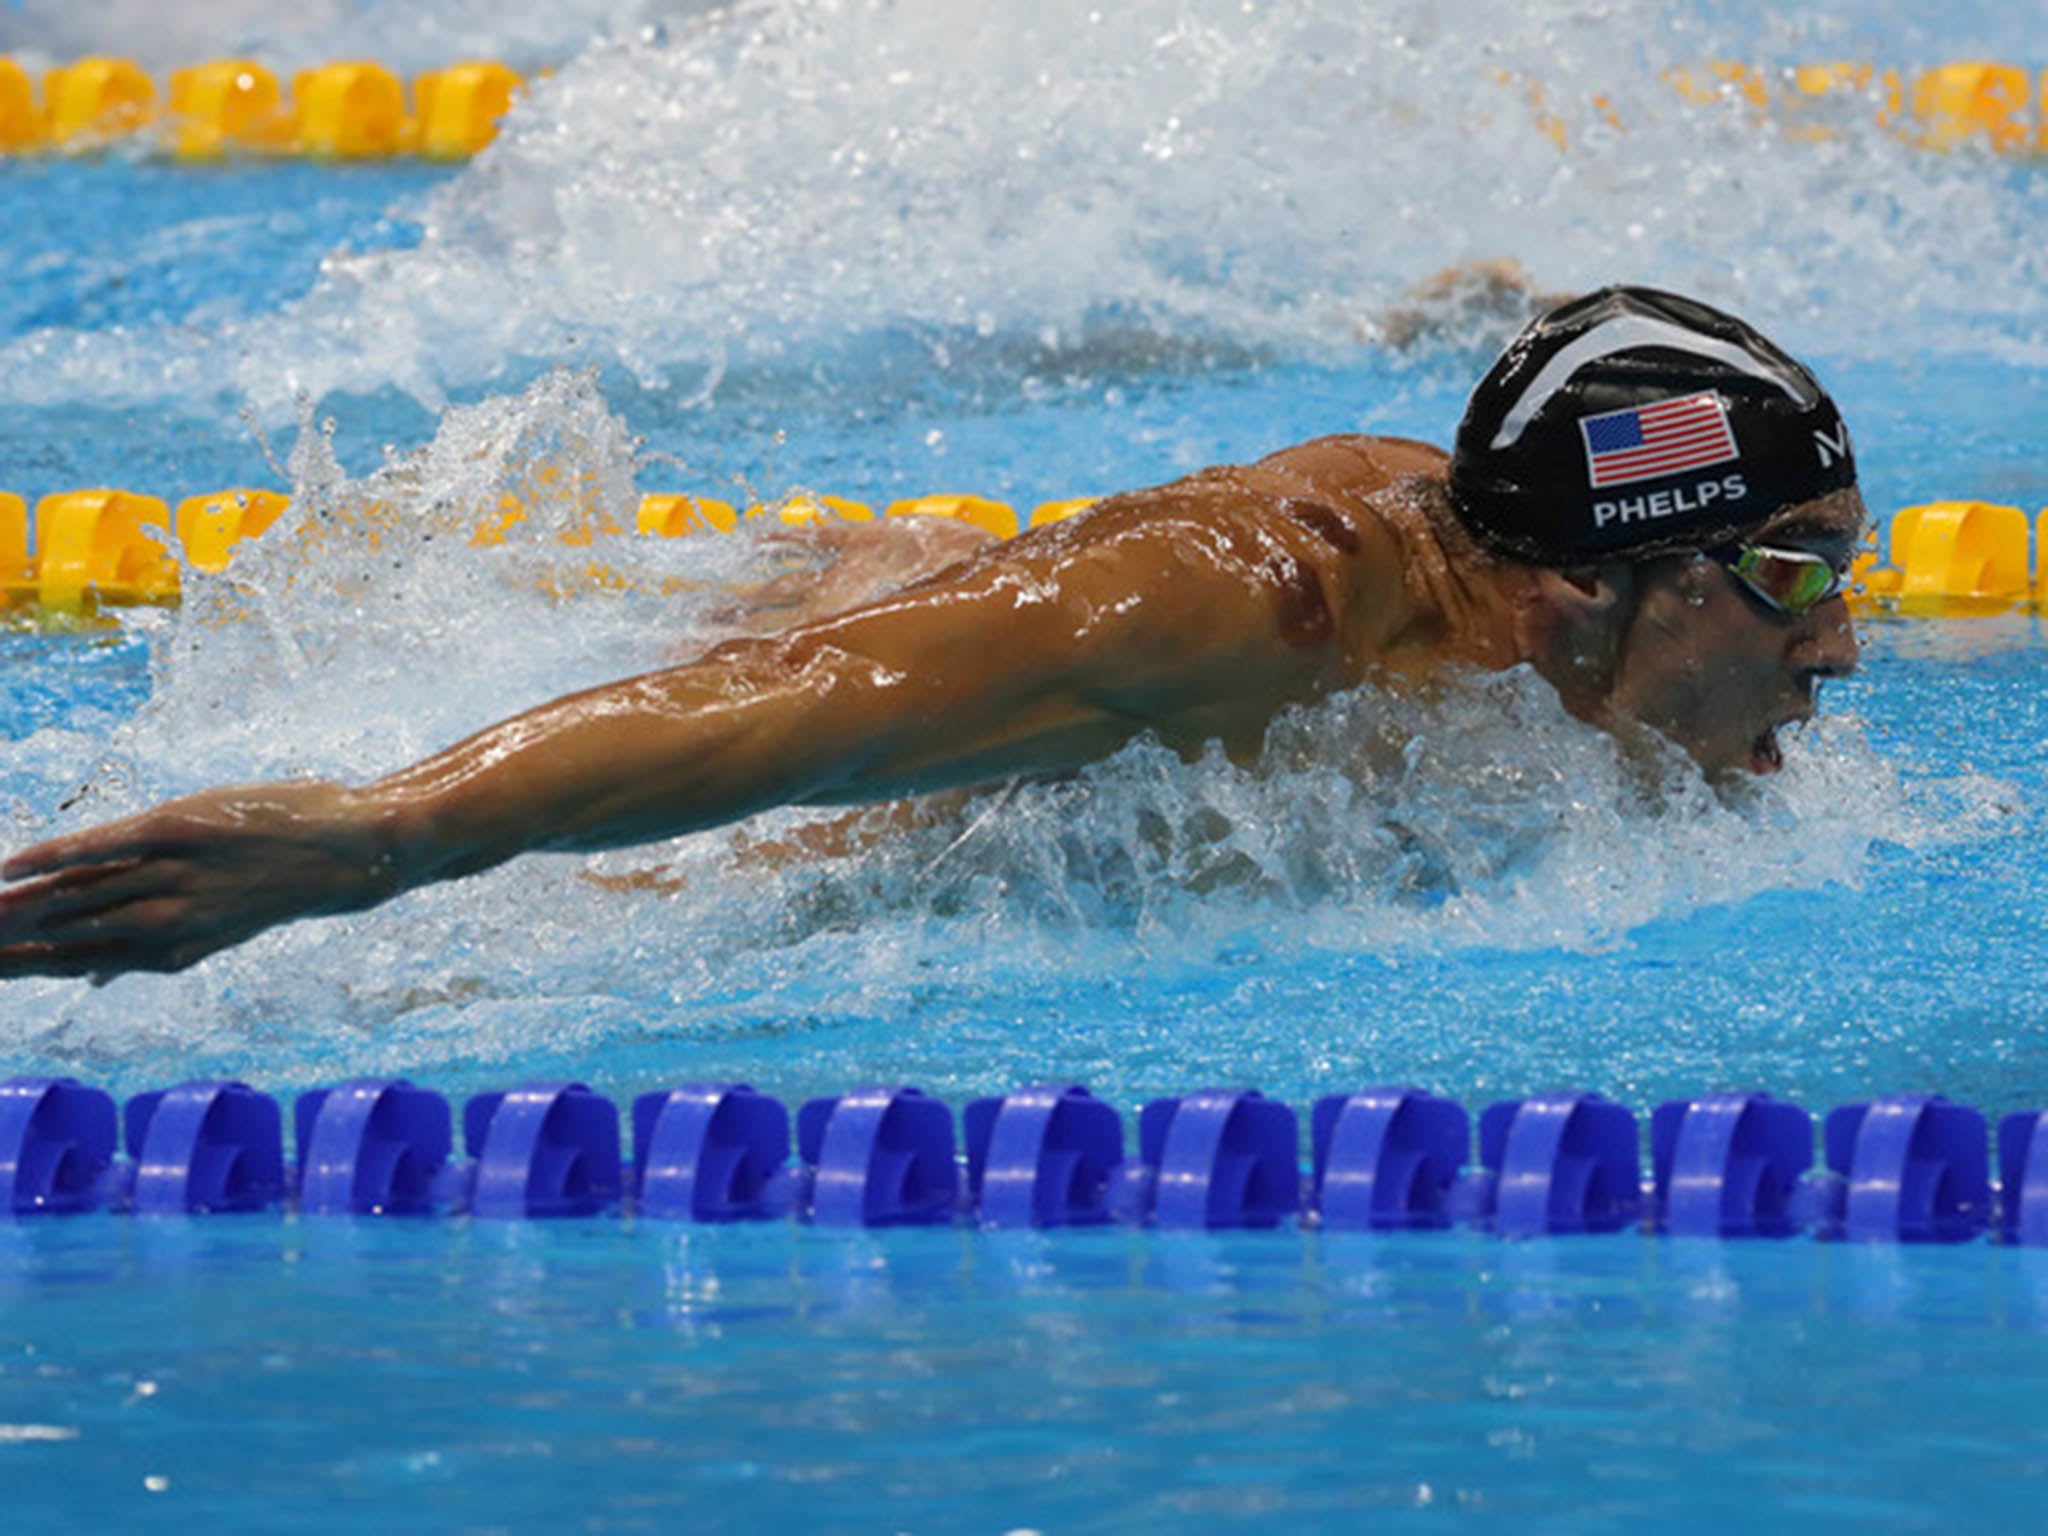 Michael Phelps pees in the pool